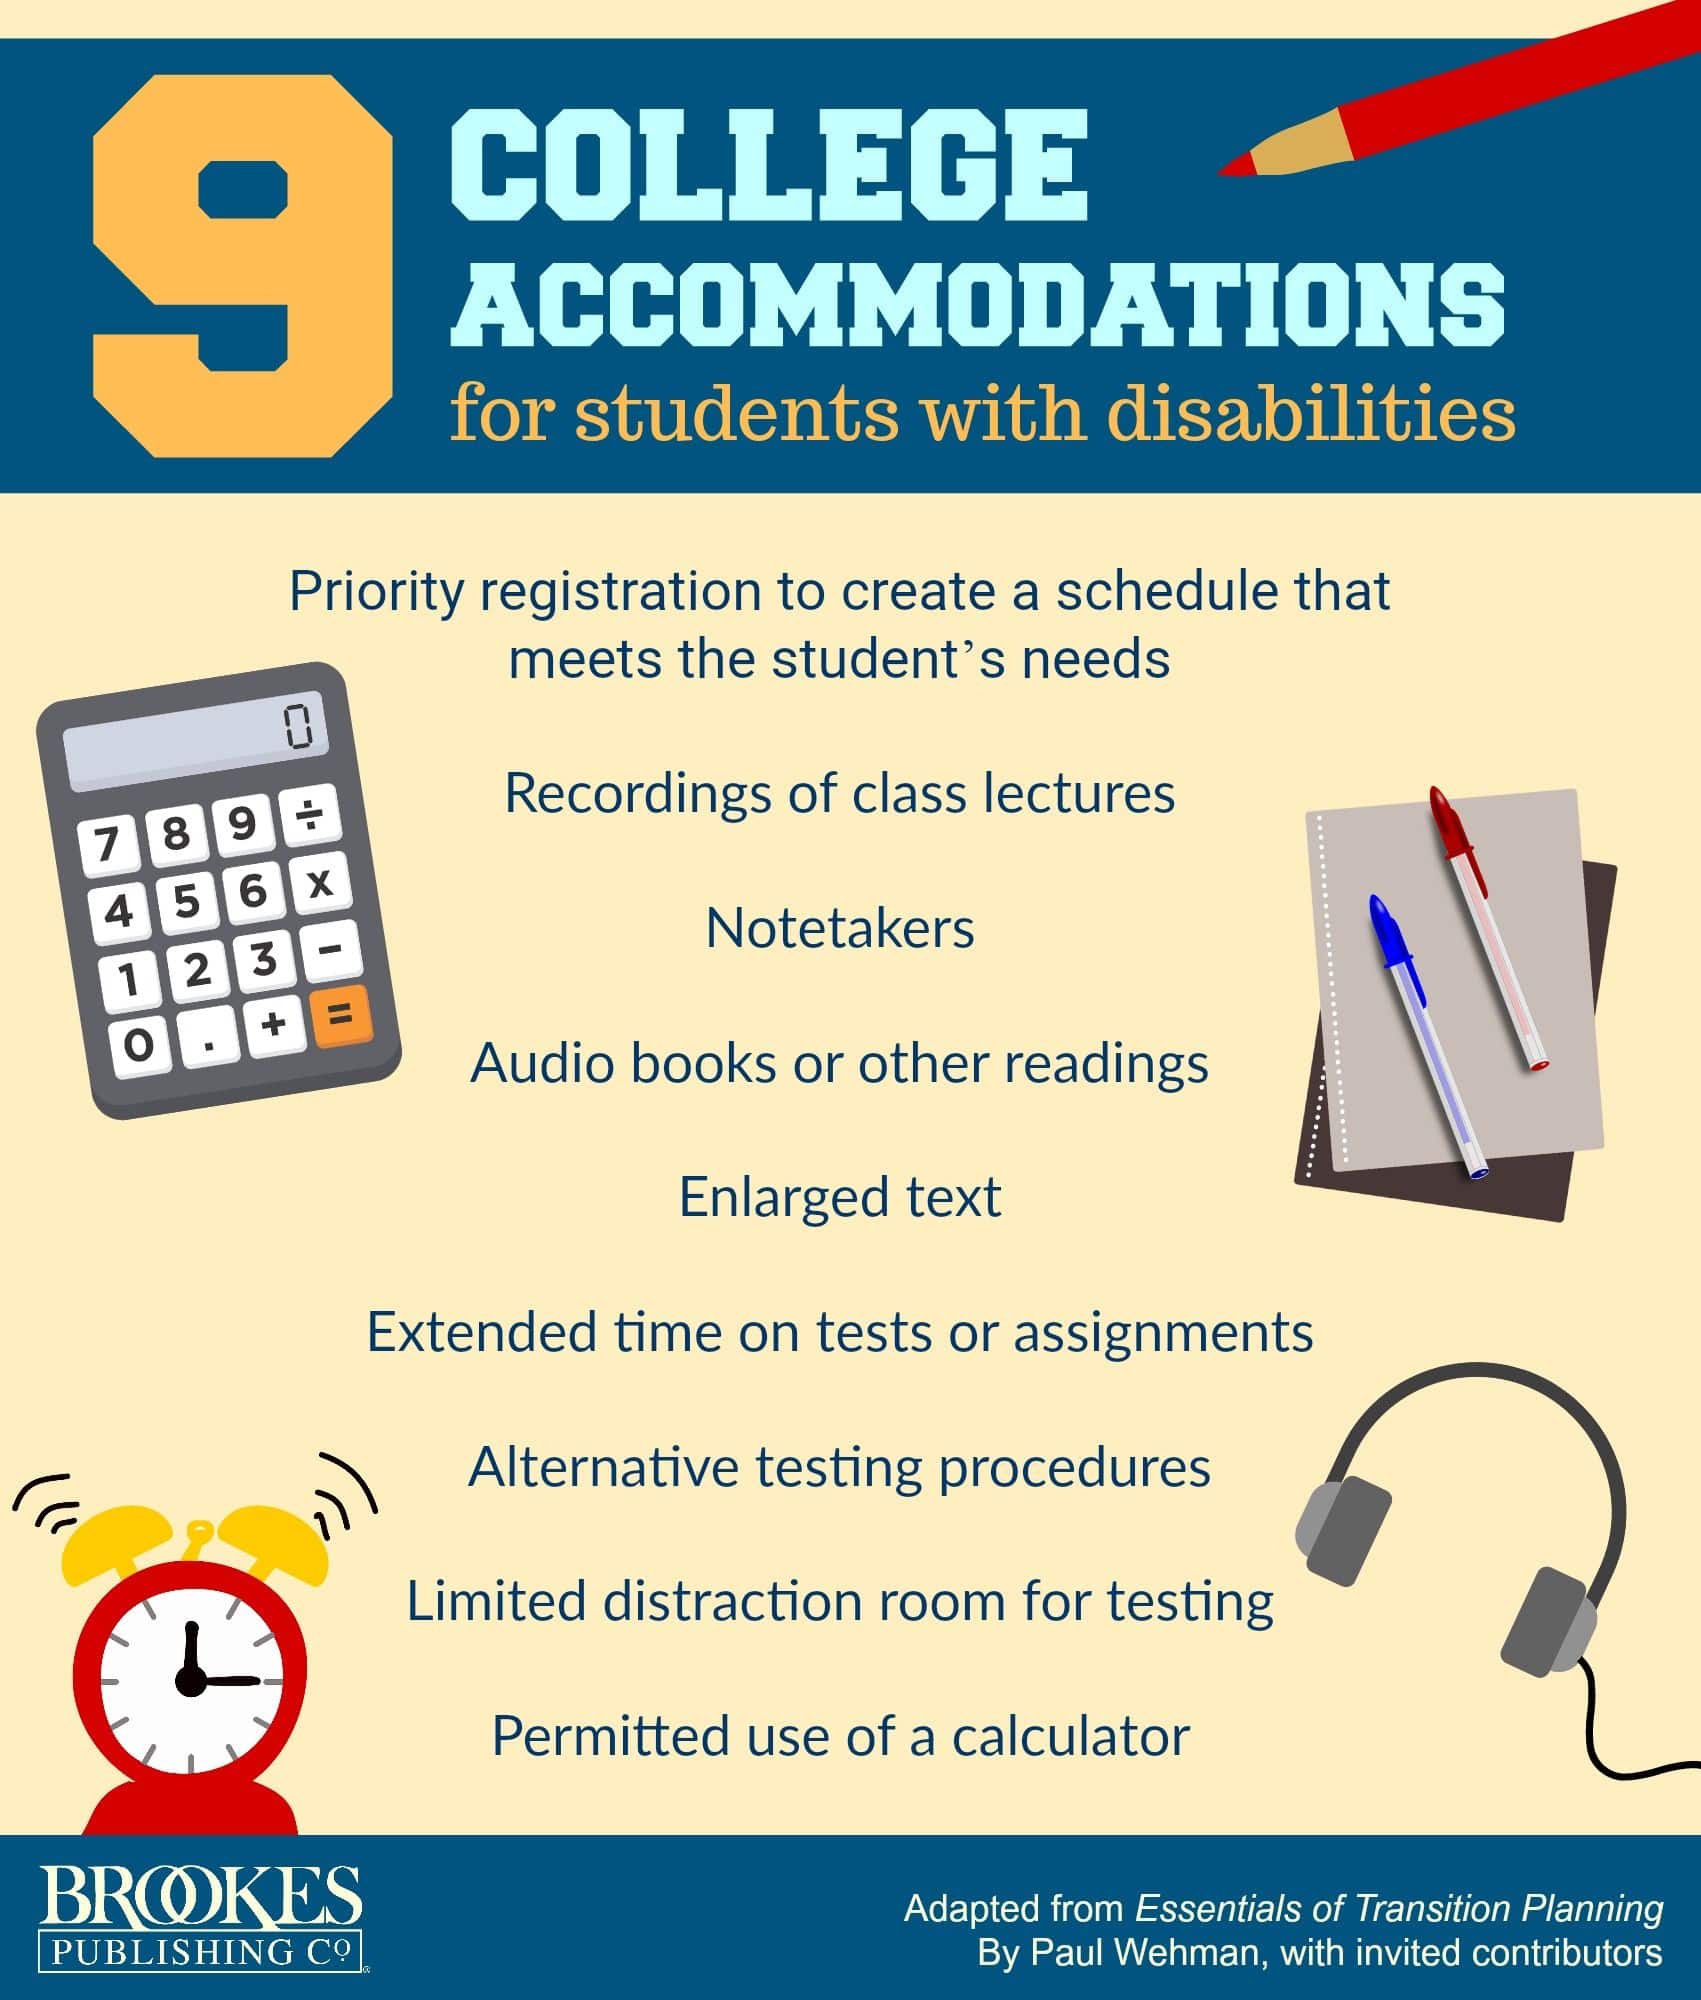 9 college accommodations for students with disabilities.